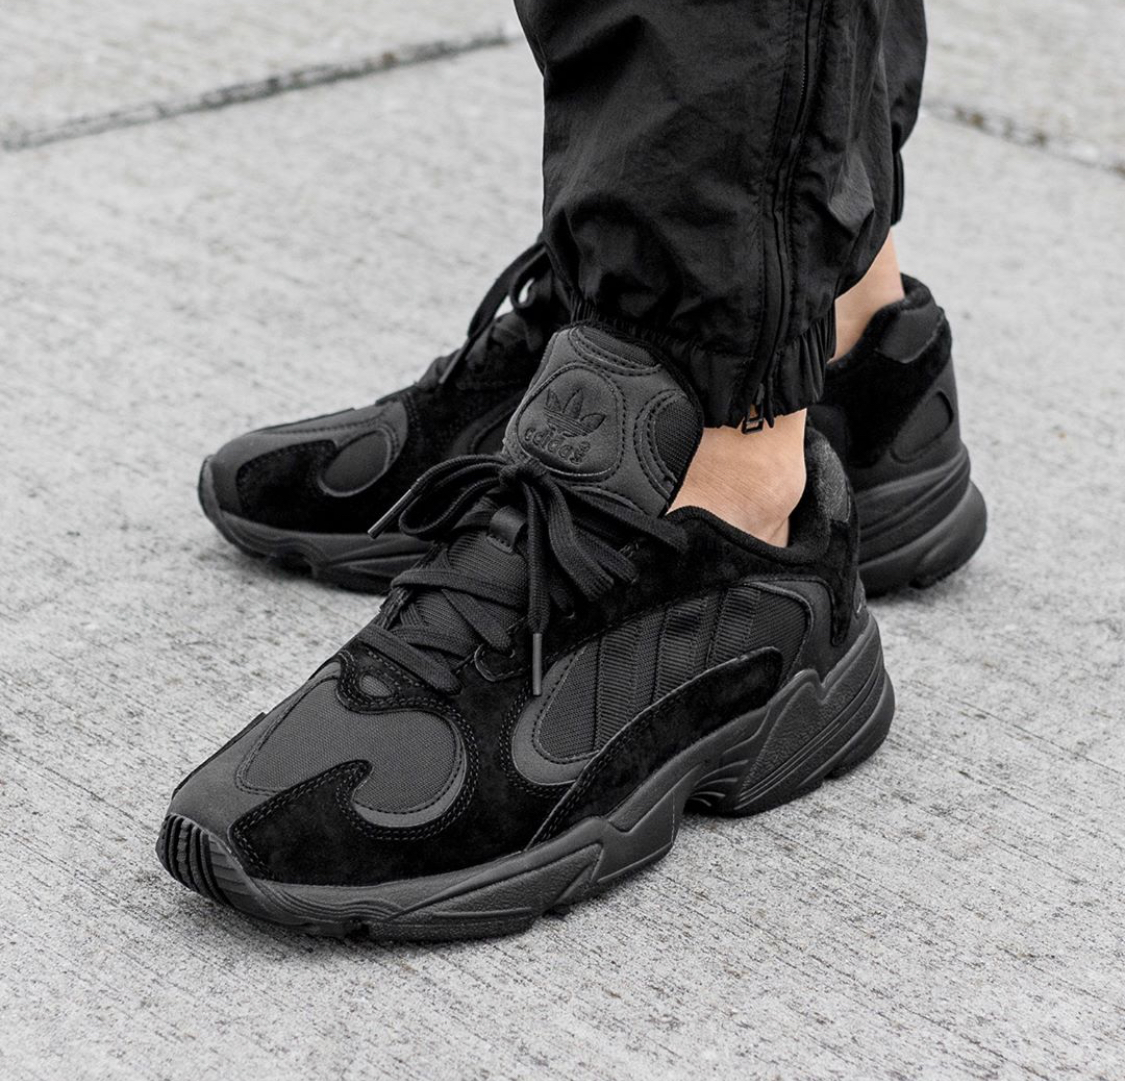 Sophisticated Bungalow Mechanic On Sale: adidas Yung 1 OG "Triple Black" — Sneaker Shouts